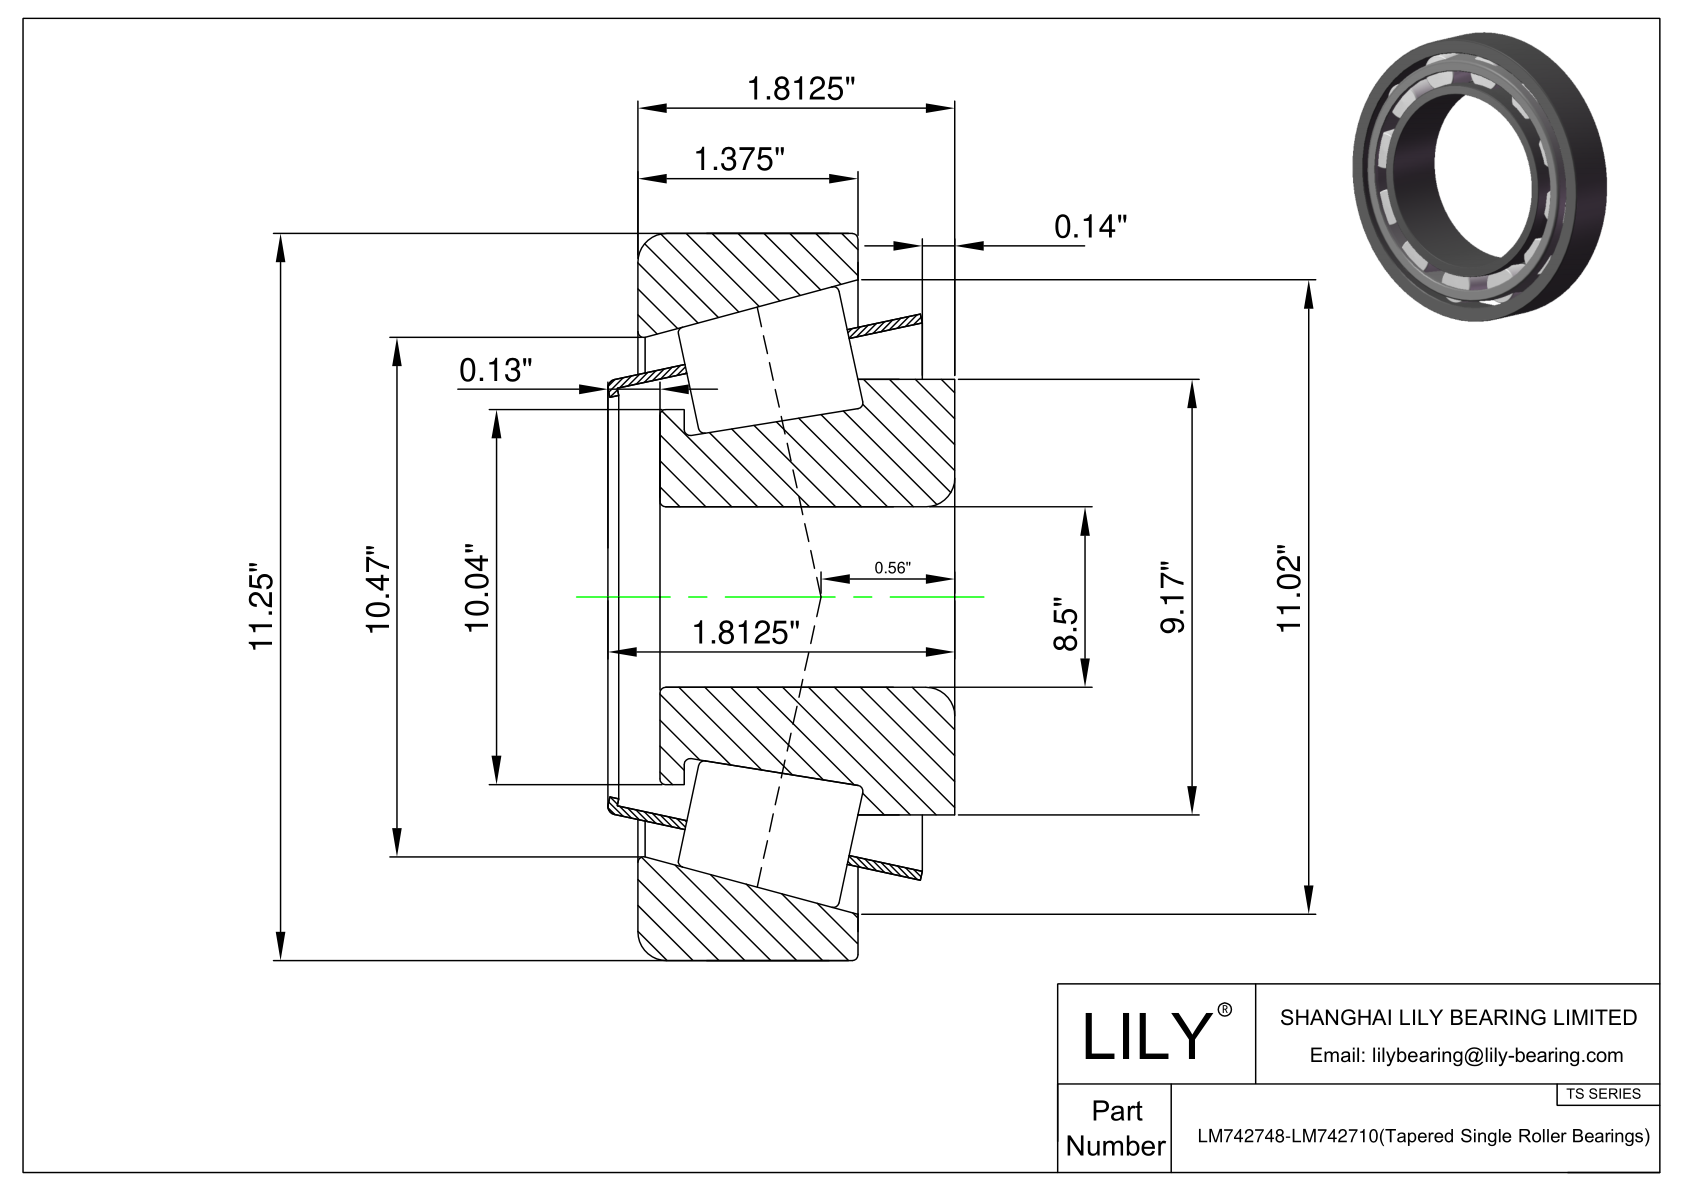 LM742748-LM742710 TS (Tapered Single Roller Bearings) (Imperial) cad drawing